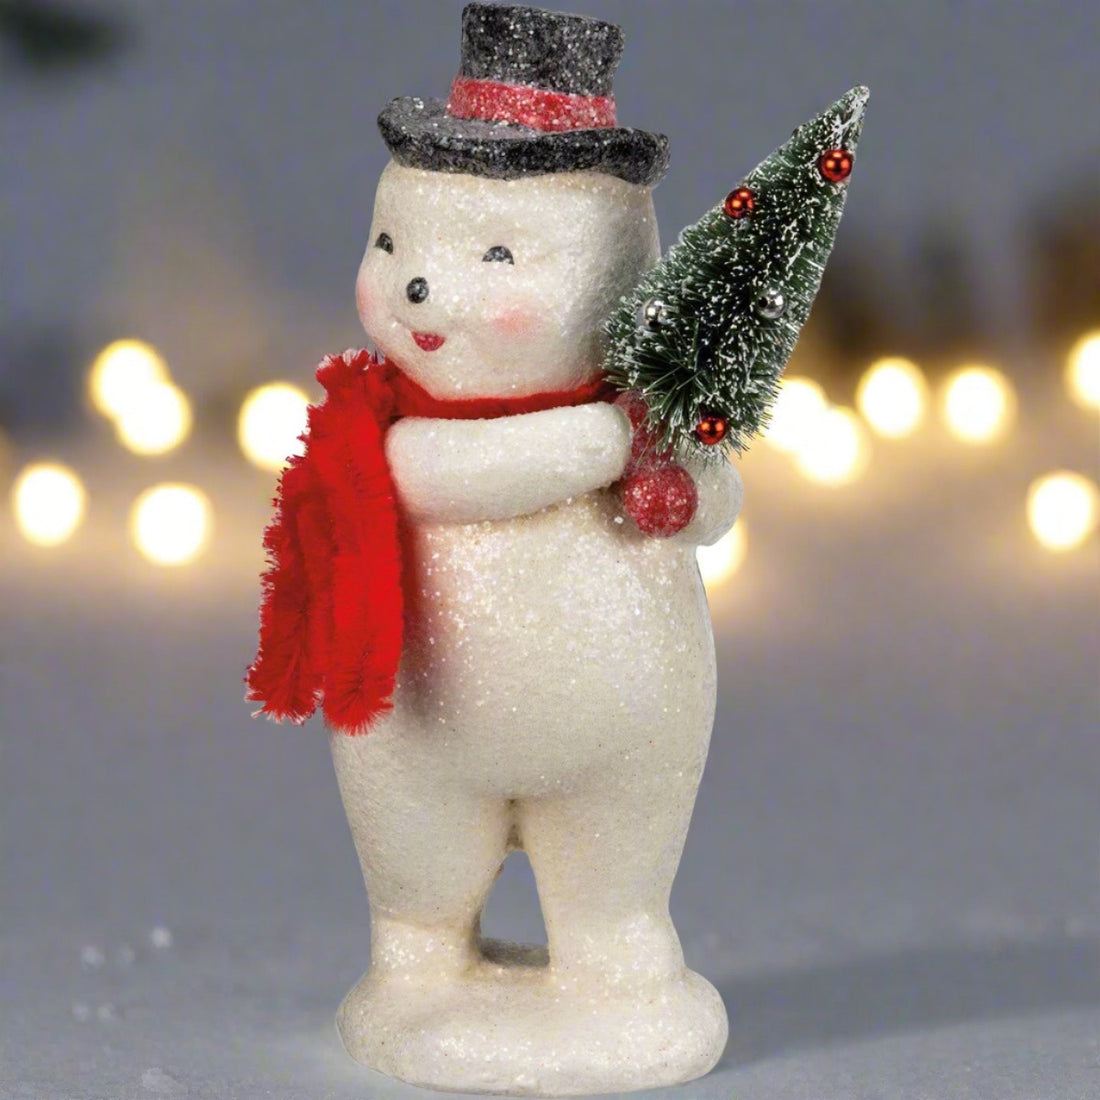 Christmas Vintage Look Top Hat Snowman w/ Bottle Brush Tree Figurine - The Primitive Pineapple Collection